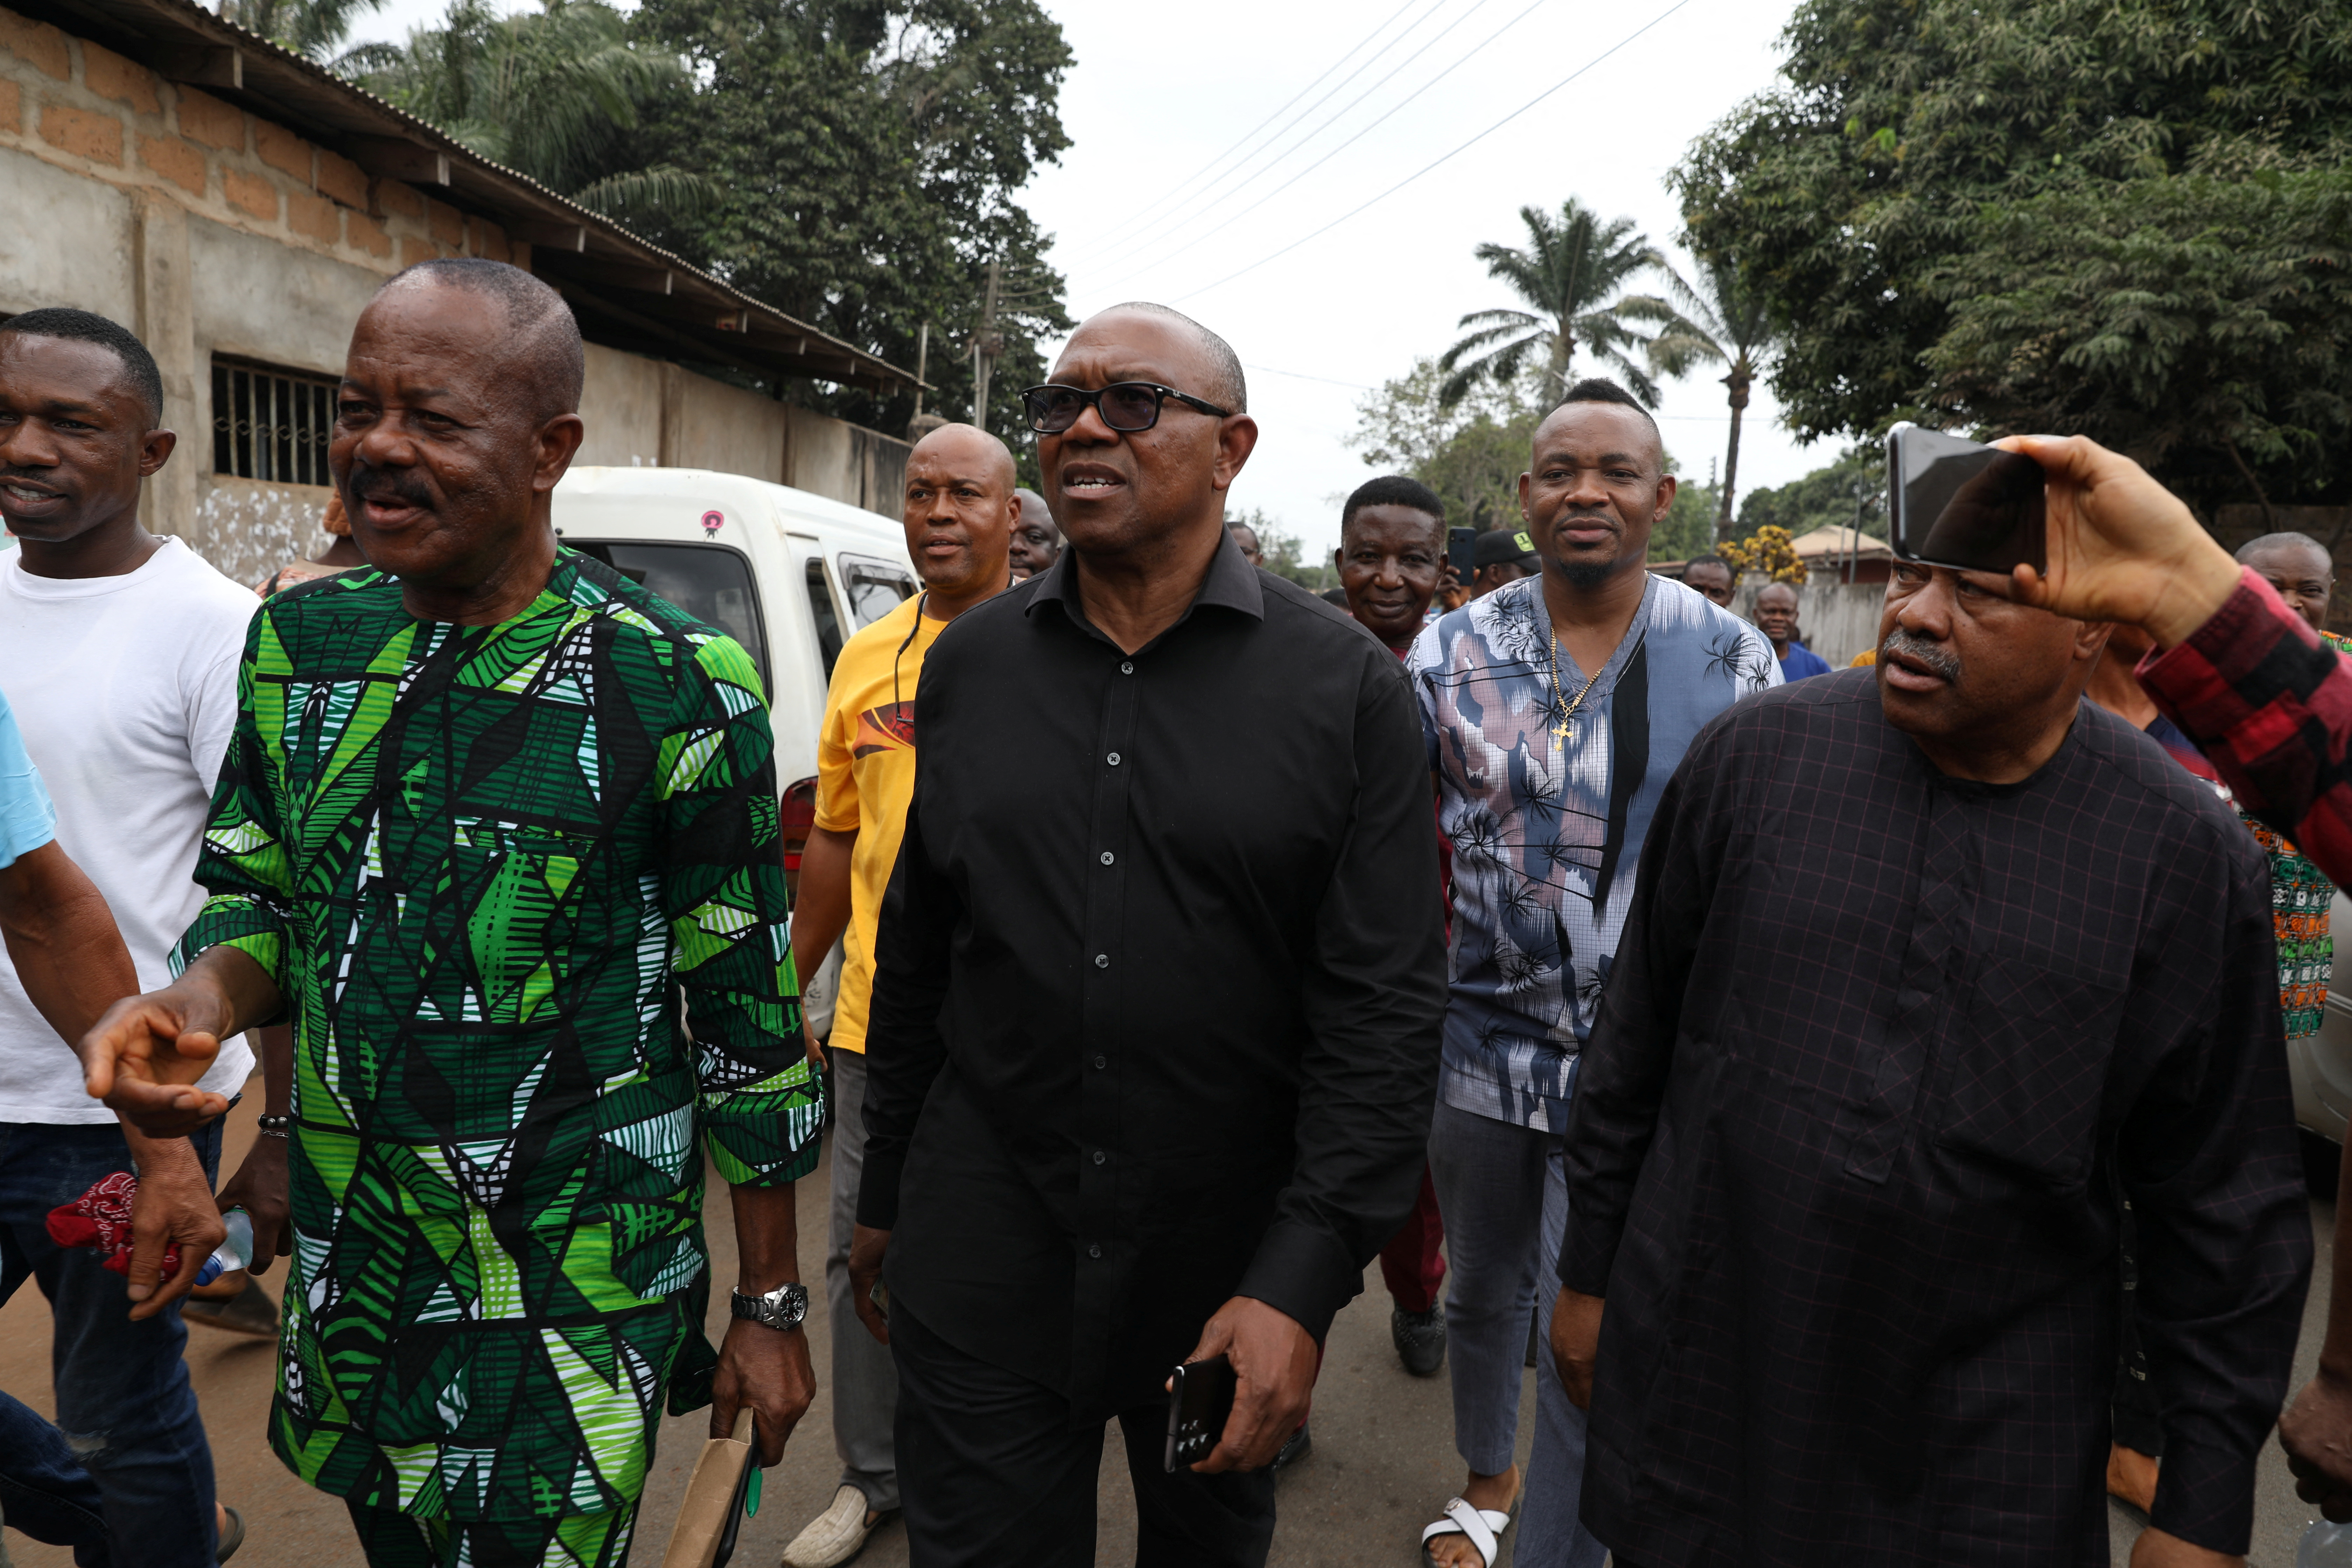 Labour Party (LP) Presidential candidate, Peter Obi, arrives at a polling unit to cast his vote during Nigeria's presidential election in his hometown in Agulu